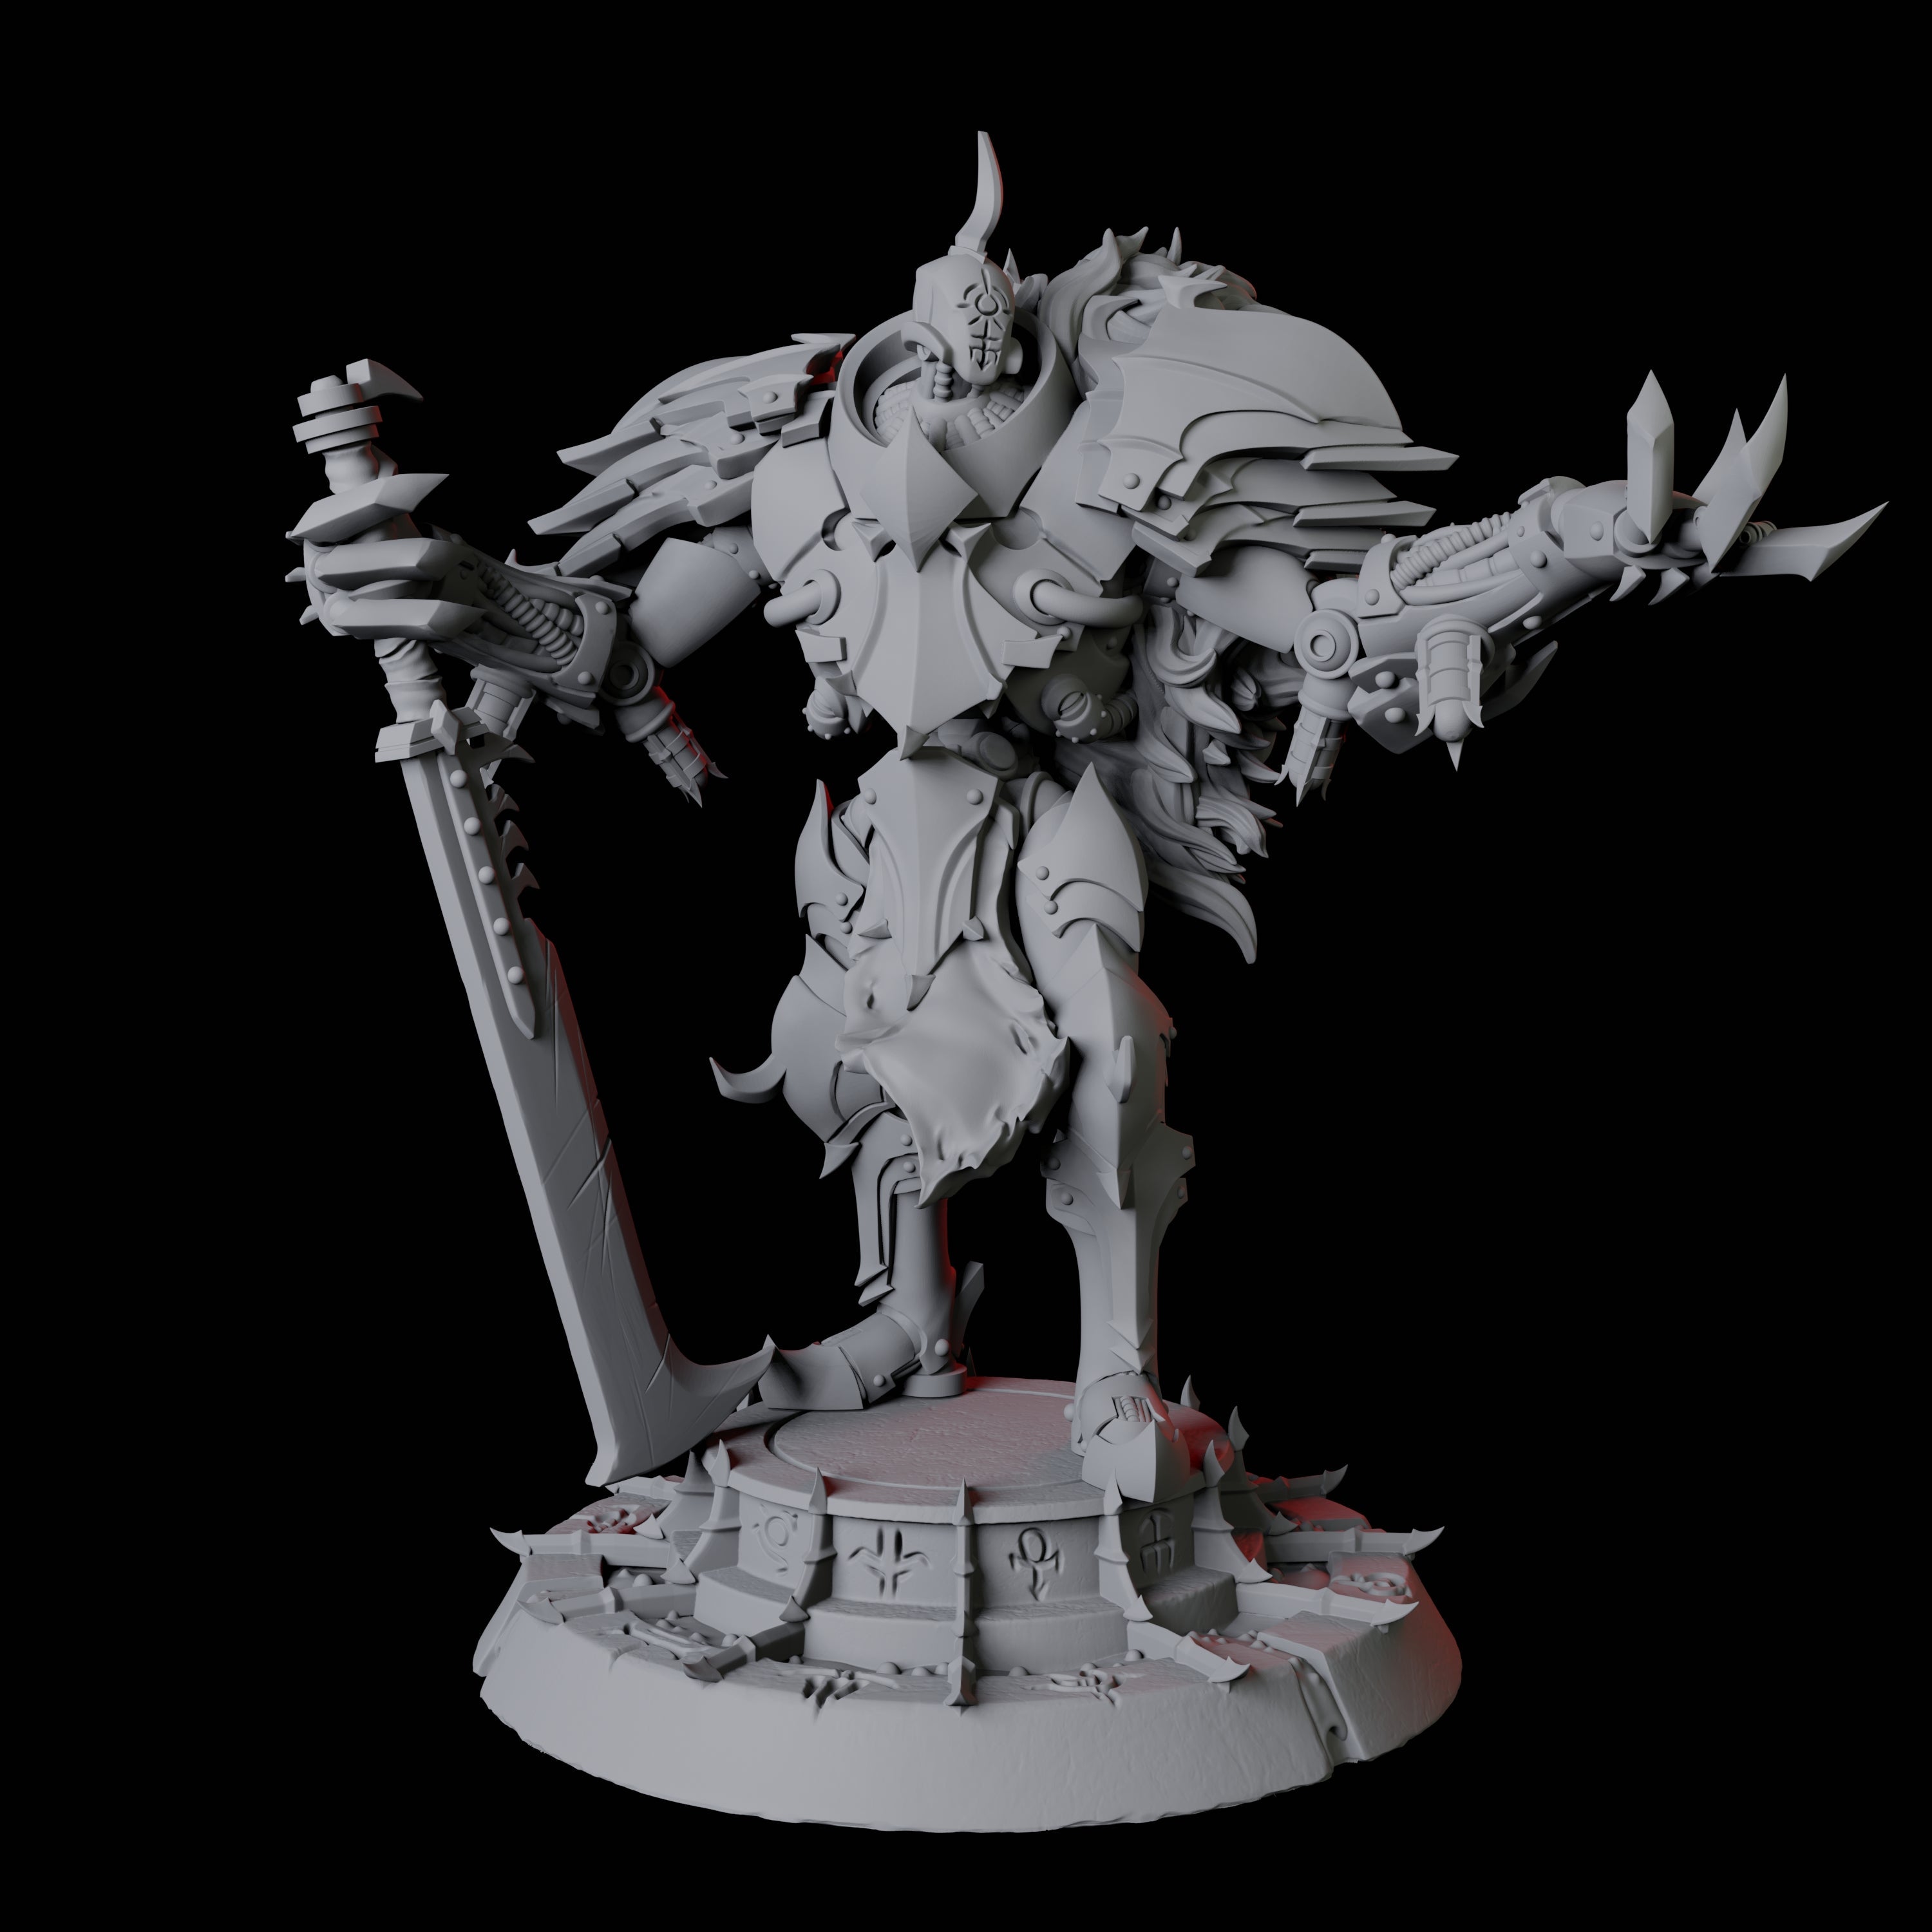 Gleaming Clockwork Soldier Miniature for Dungeons and Dragons, Pathfinder or other TTRPGs